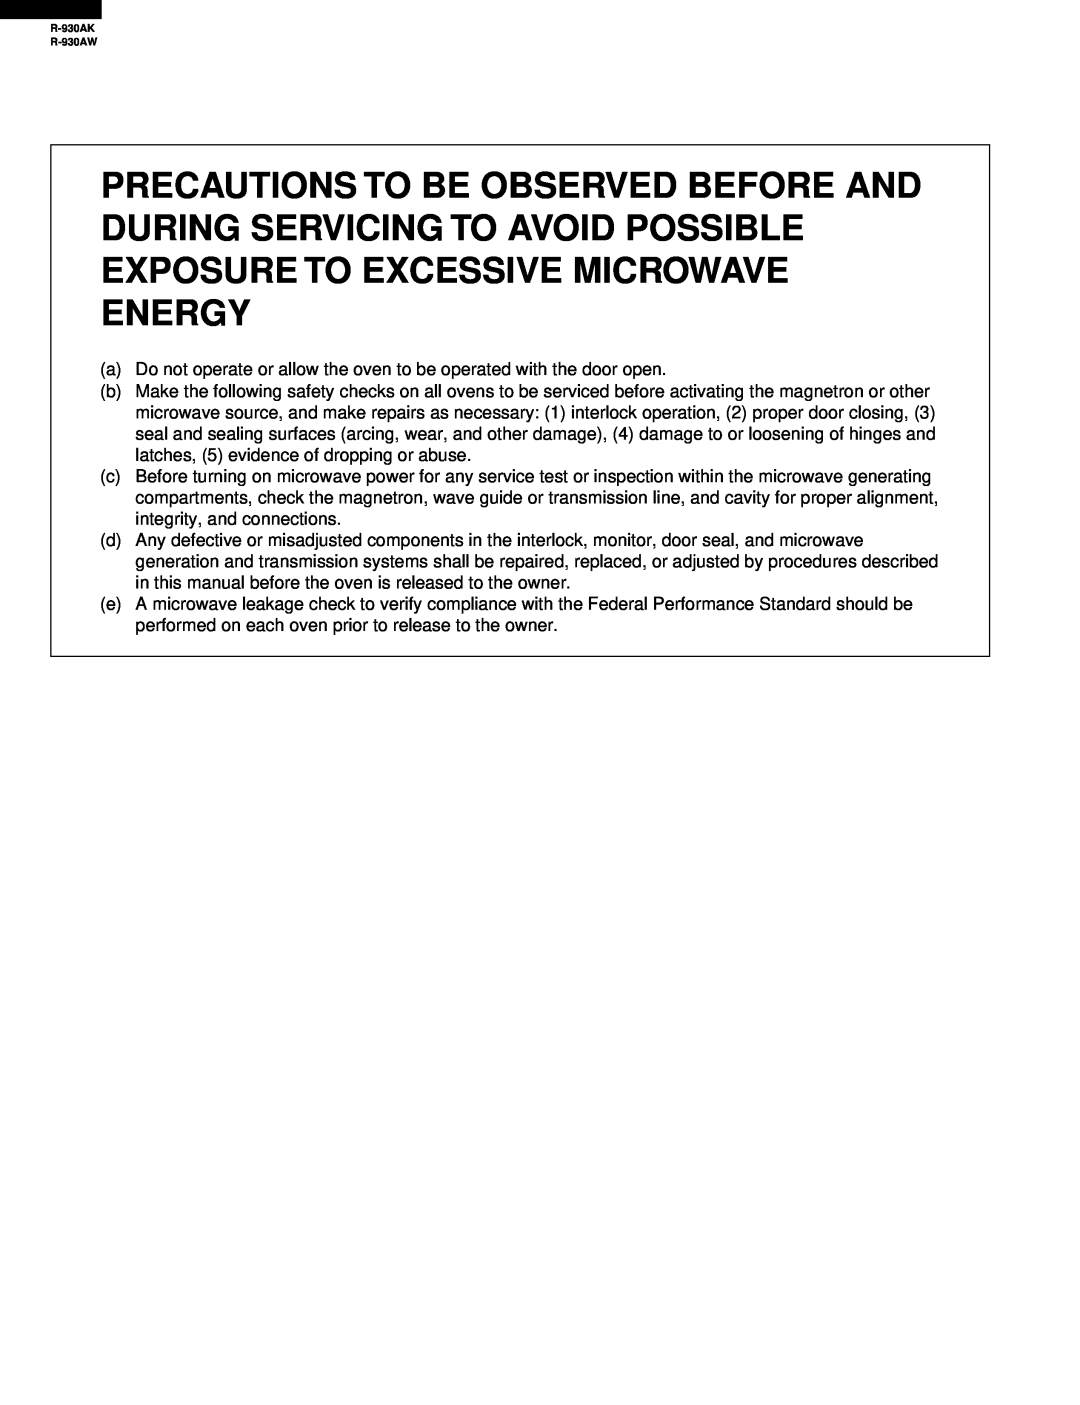 Sharp R-930AW service manual a Do not operate or allow the oven to be operated with the door open 